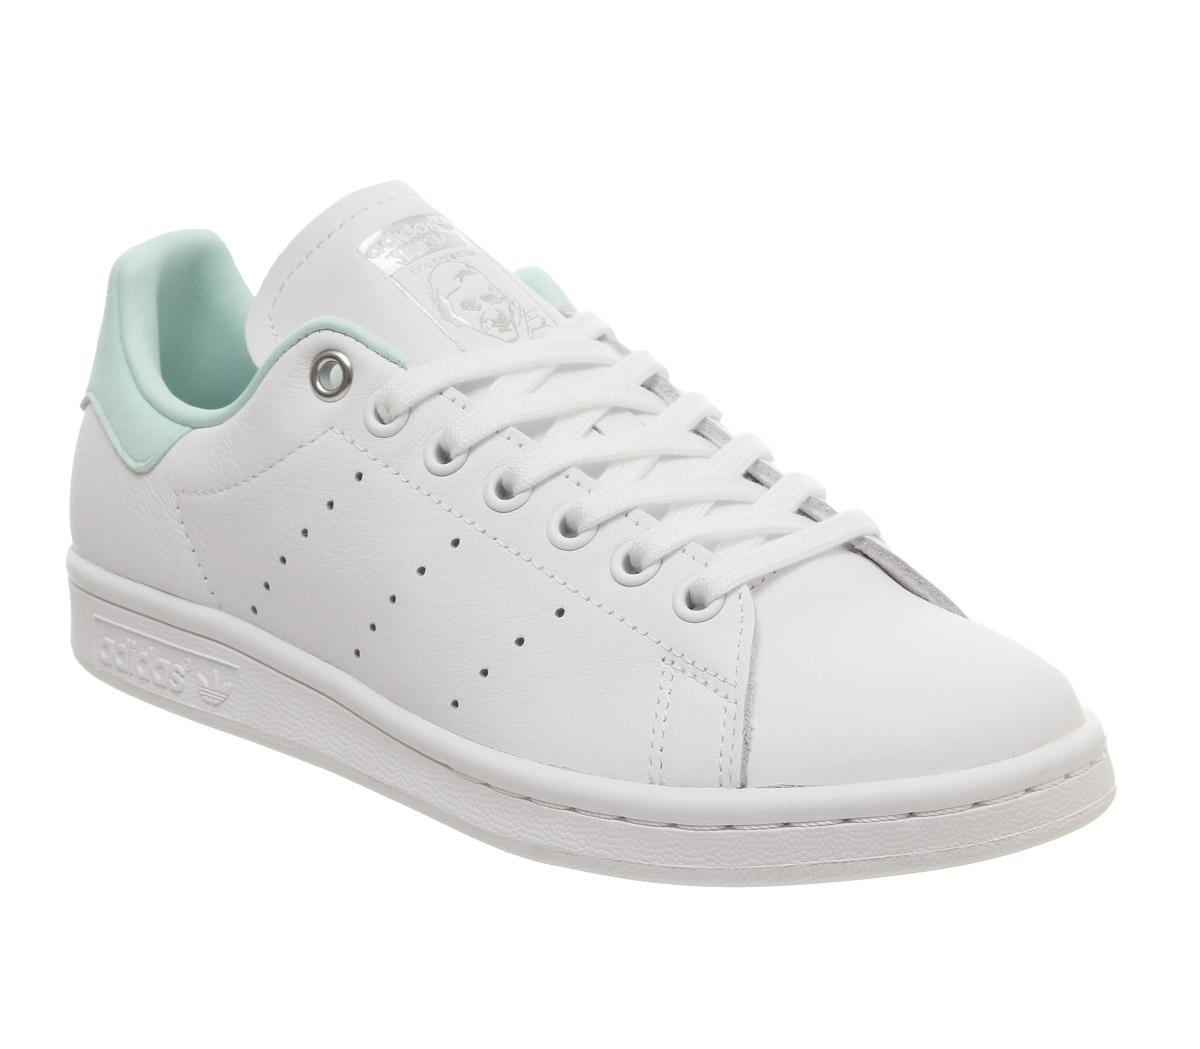 håndflade jeg er træt Bounce adidas Stan Smith Trainers White Silver Metallic Mint - Women's Trainers